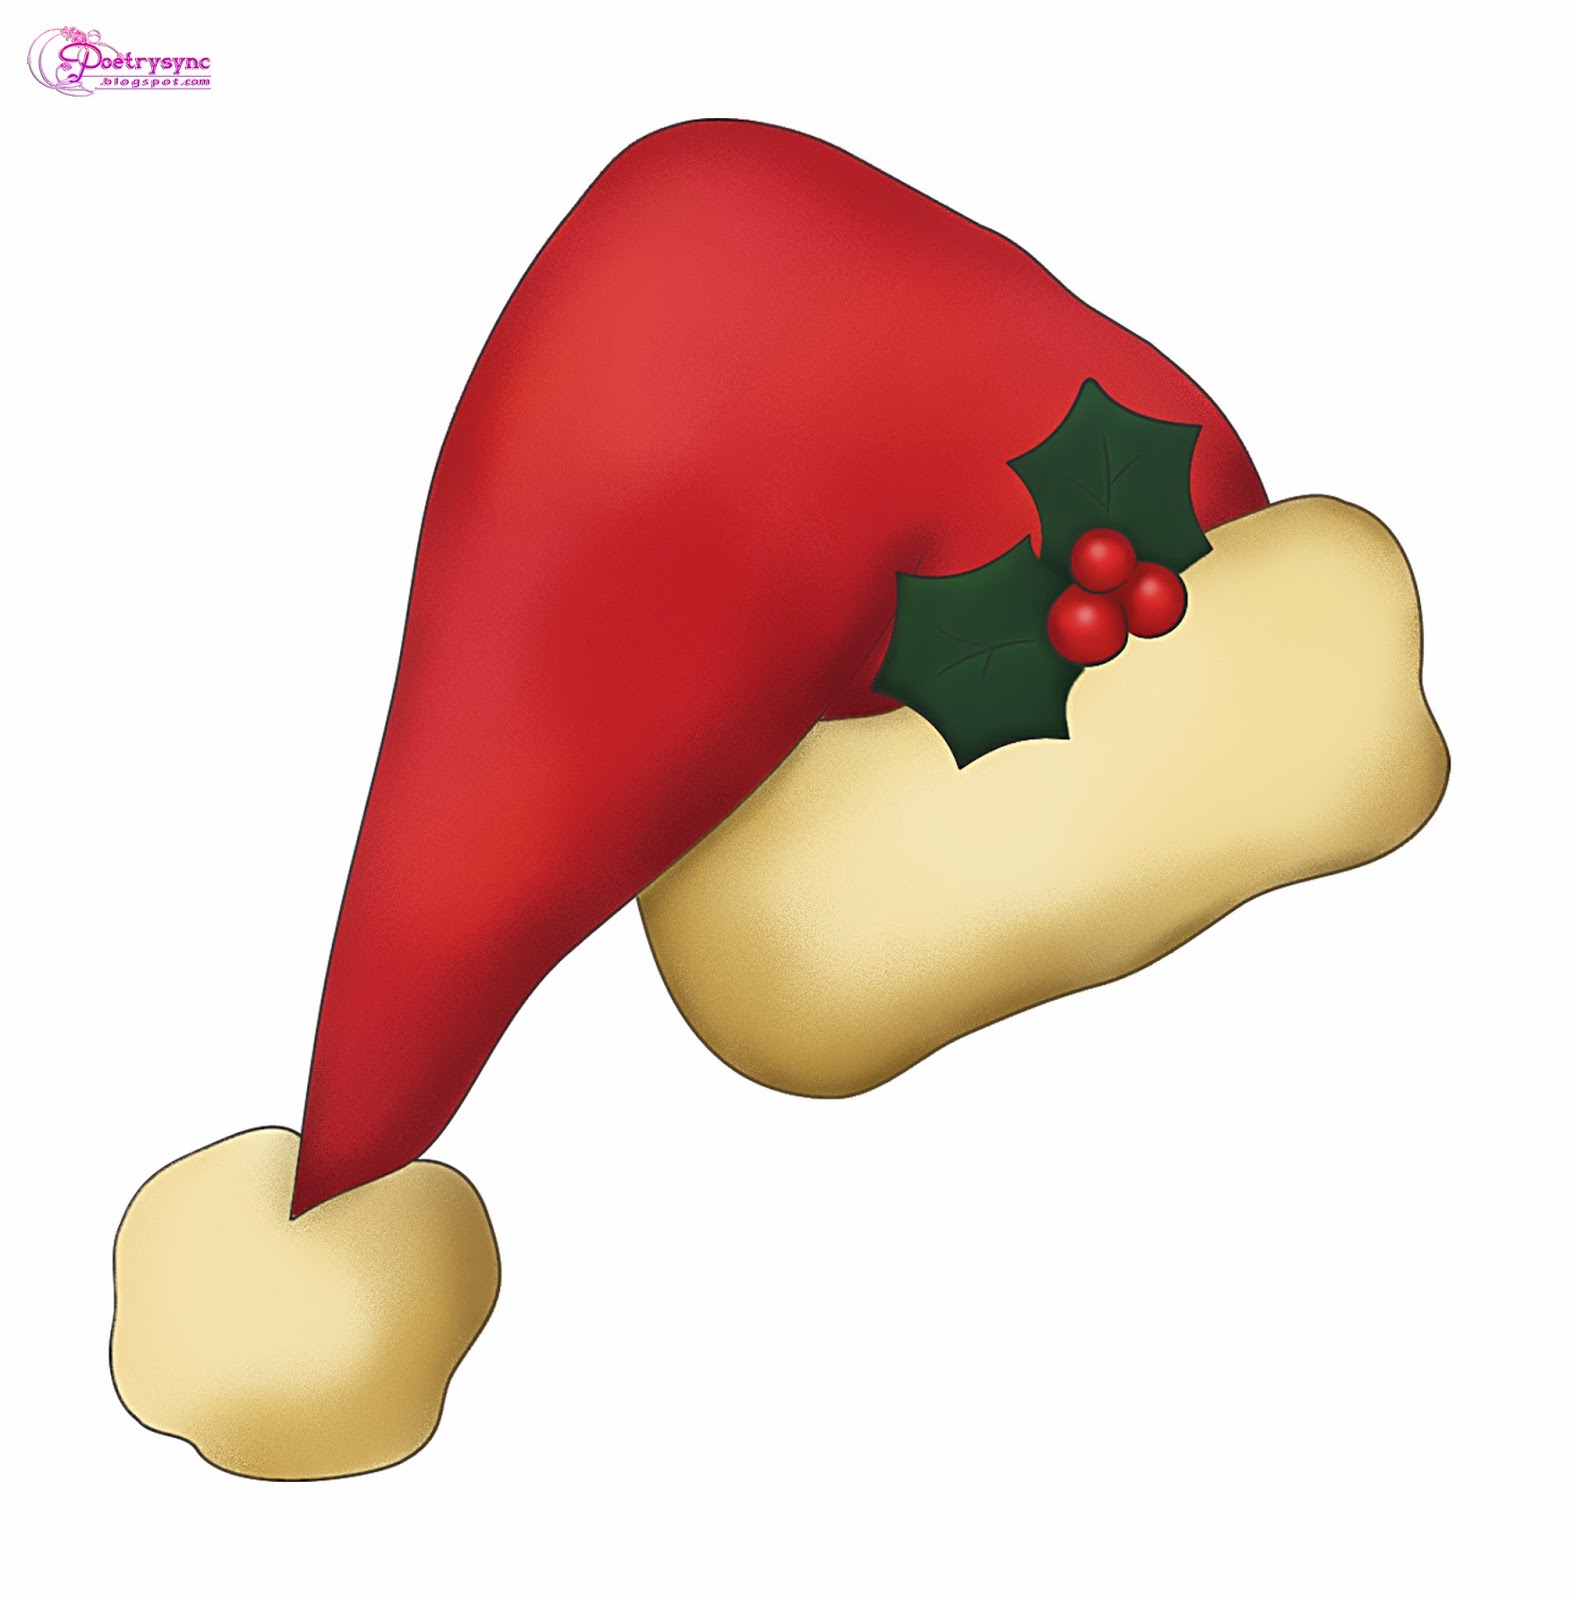 happy new year: Santa Claus HD Cliparts and Pictures for Christmas ...